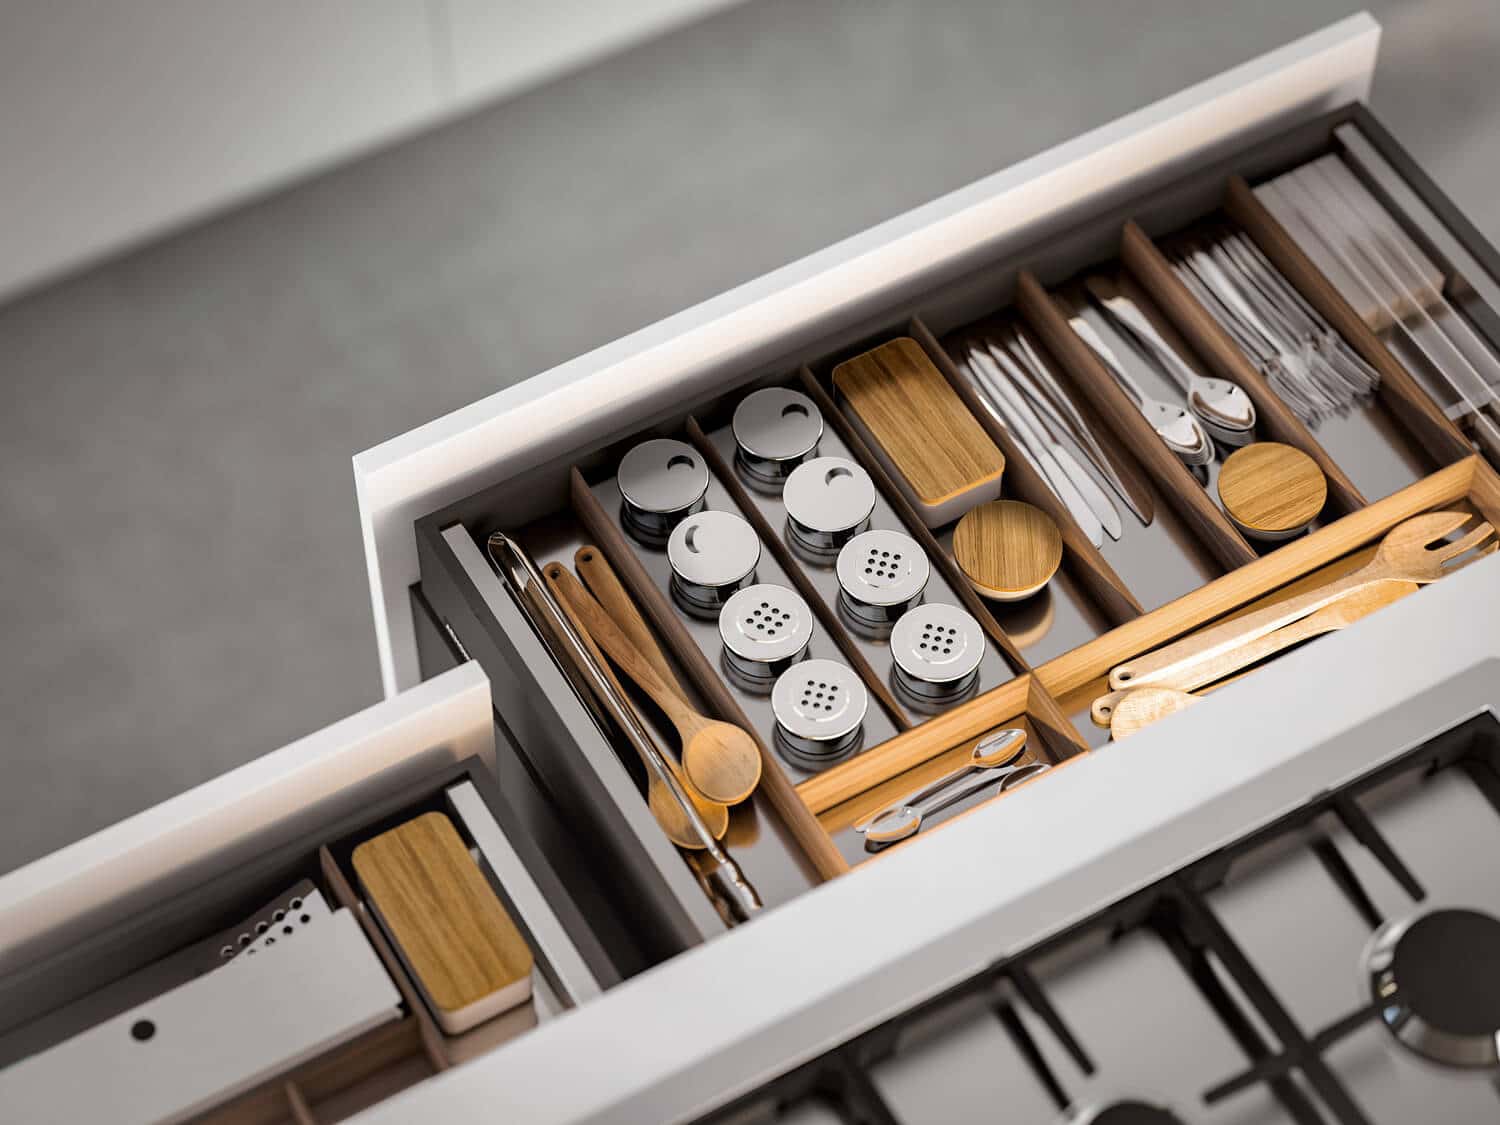 Elegant and customizable, the Elite Line drawer organizers come with Oak or Black Walnut inserts and stainless steel bases.